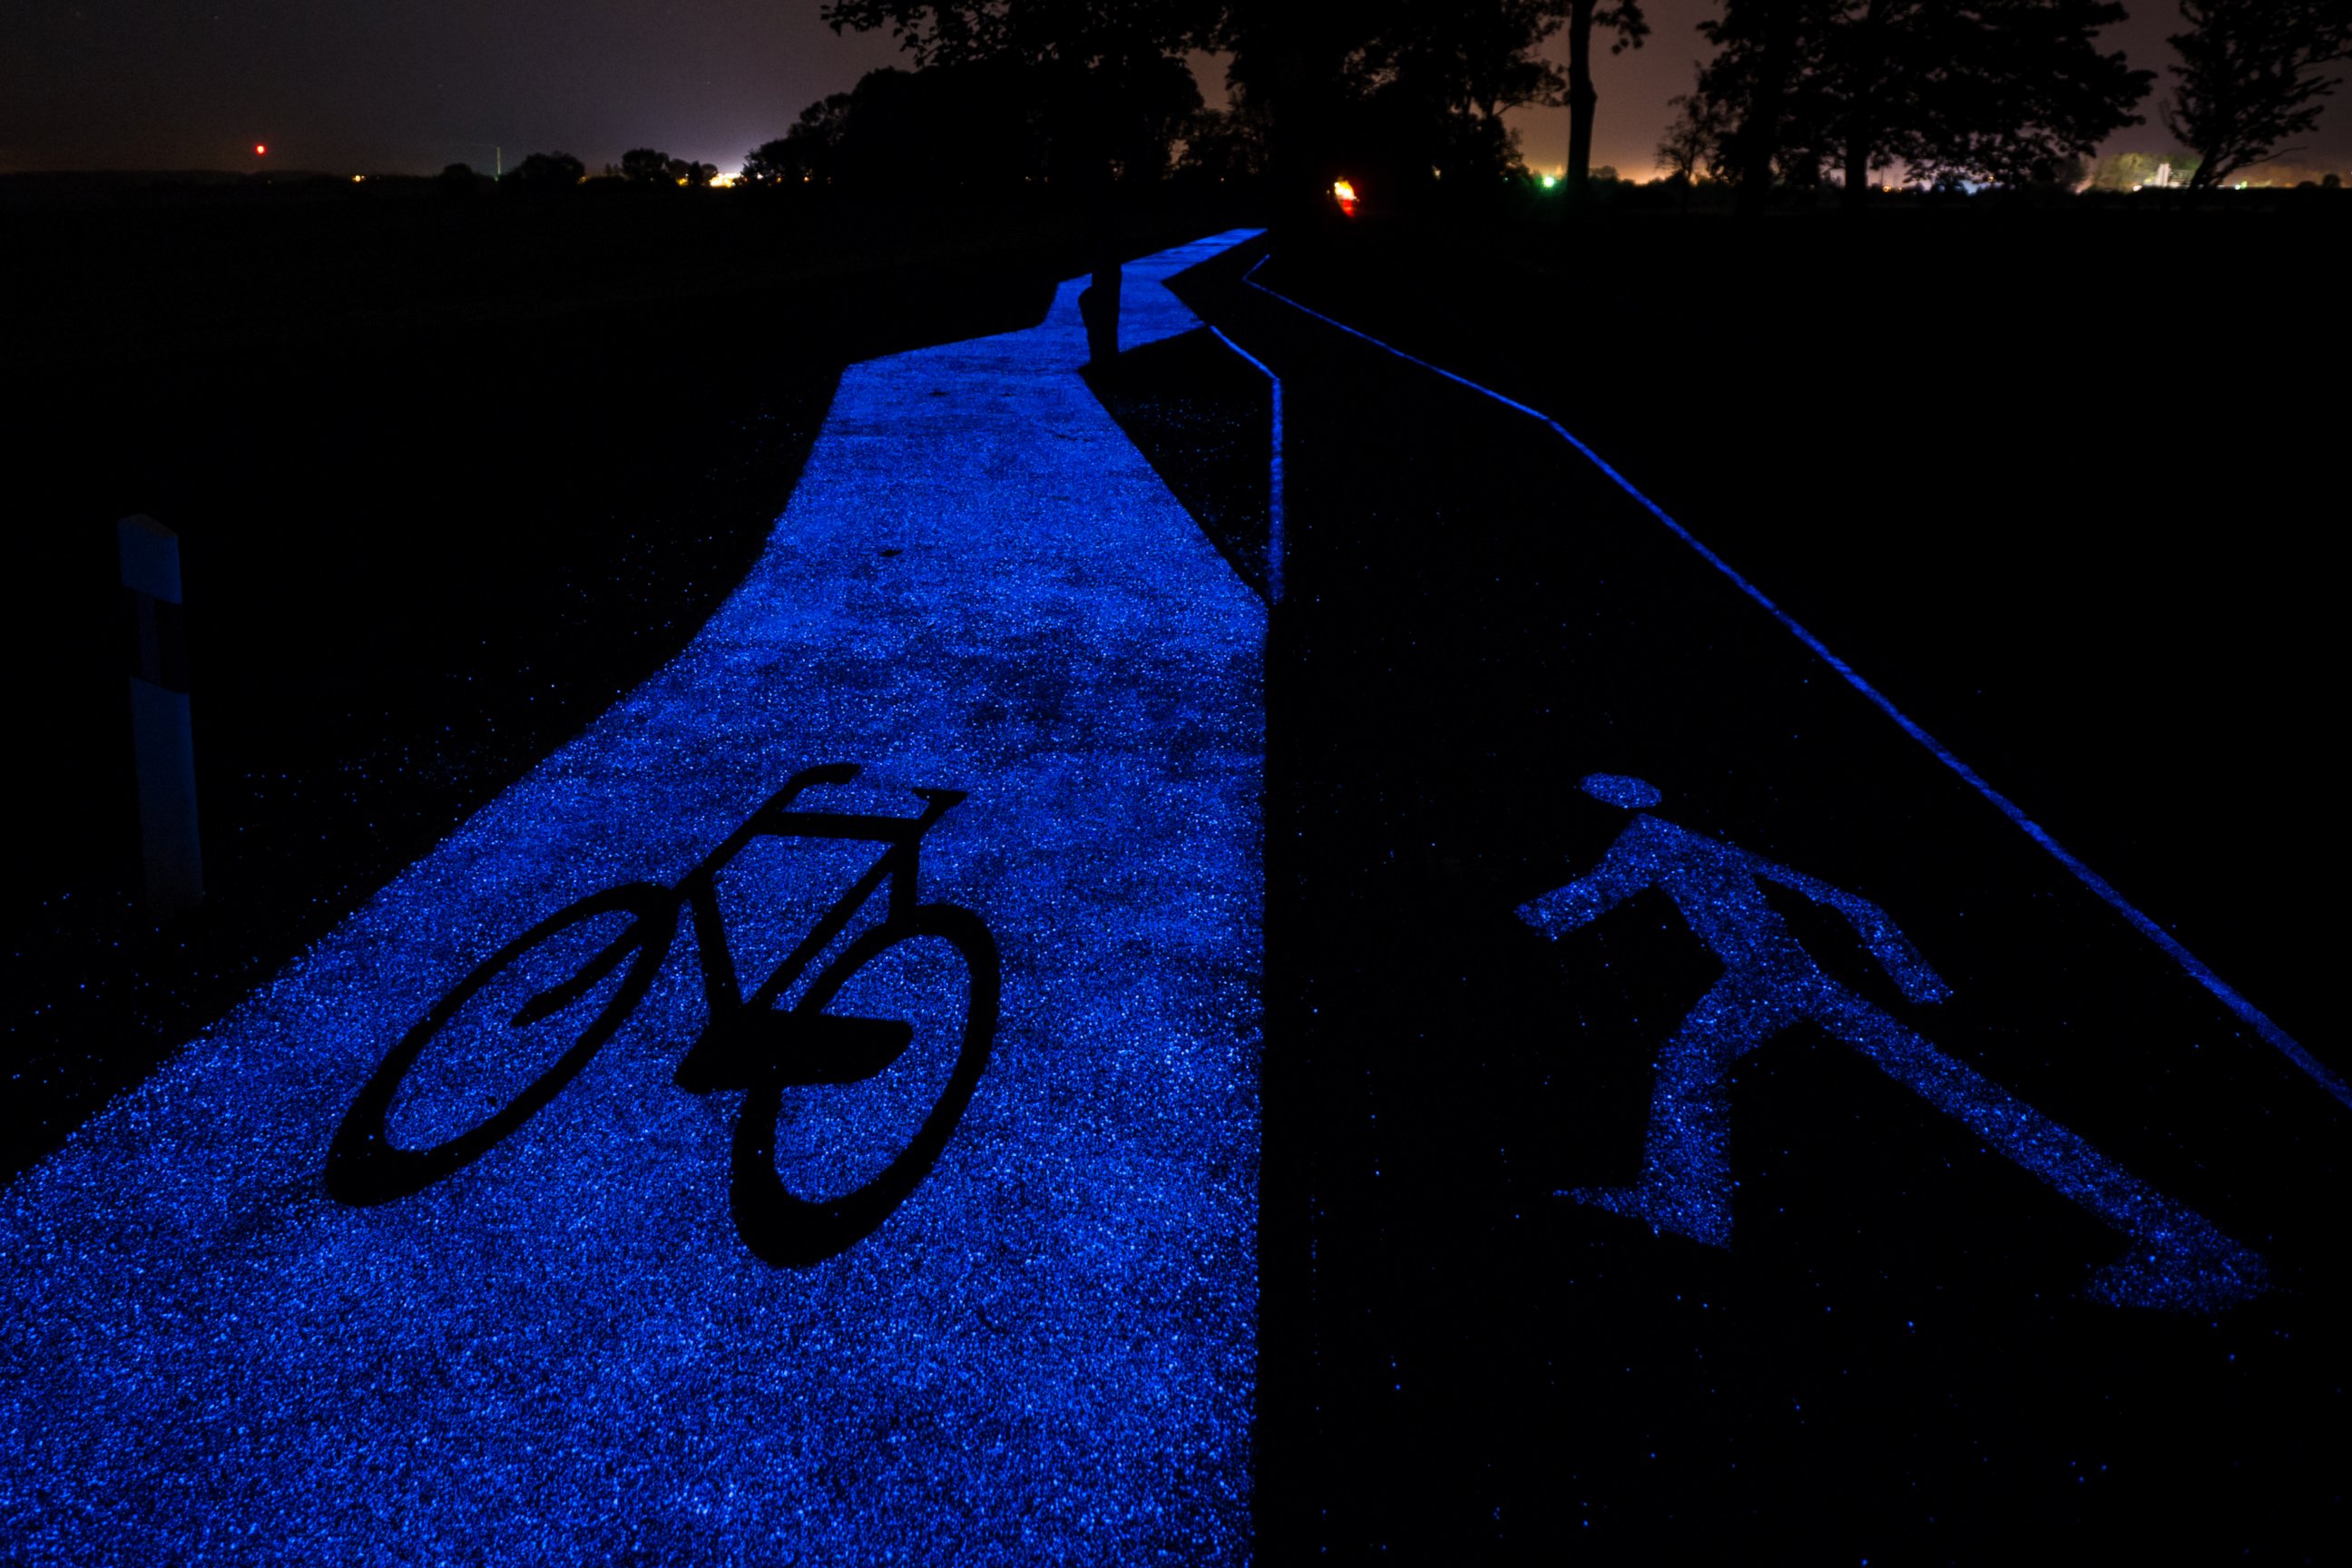 PHOTO: Poland unveiled a glow-in-the-dark bicycle path that "charges" using sunlight in the city of Olsztyn on Sept. 23, 2016. 